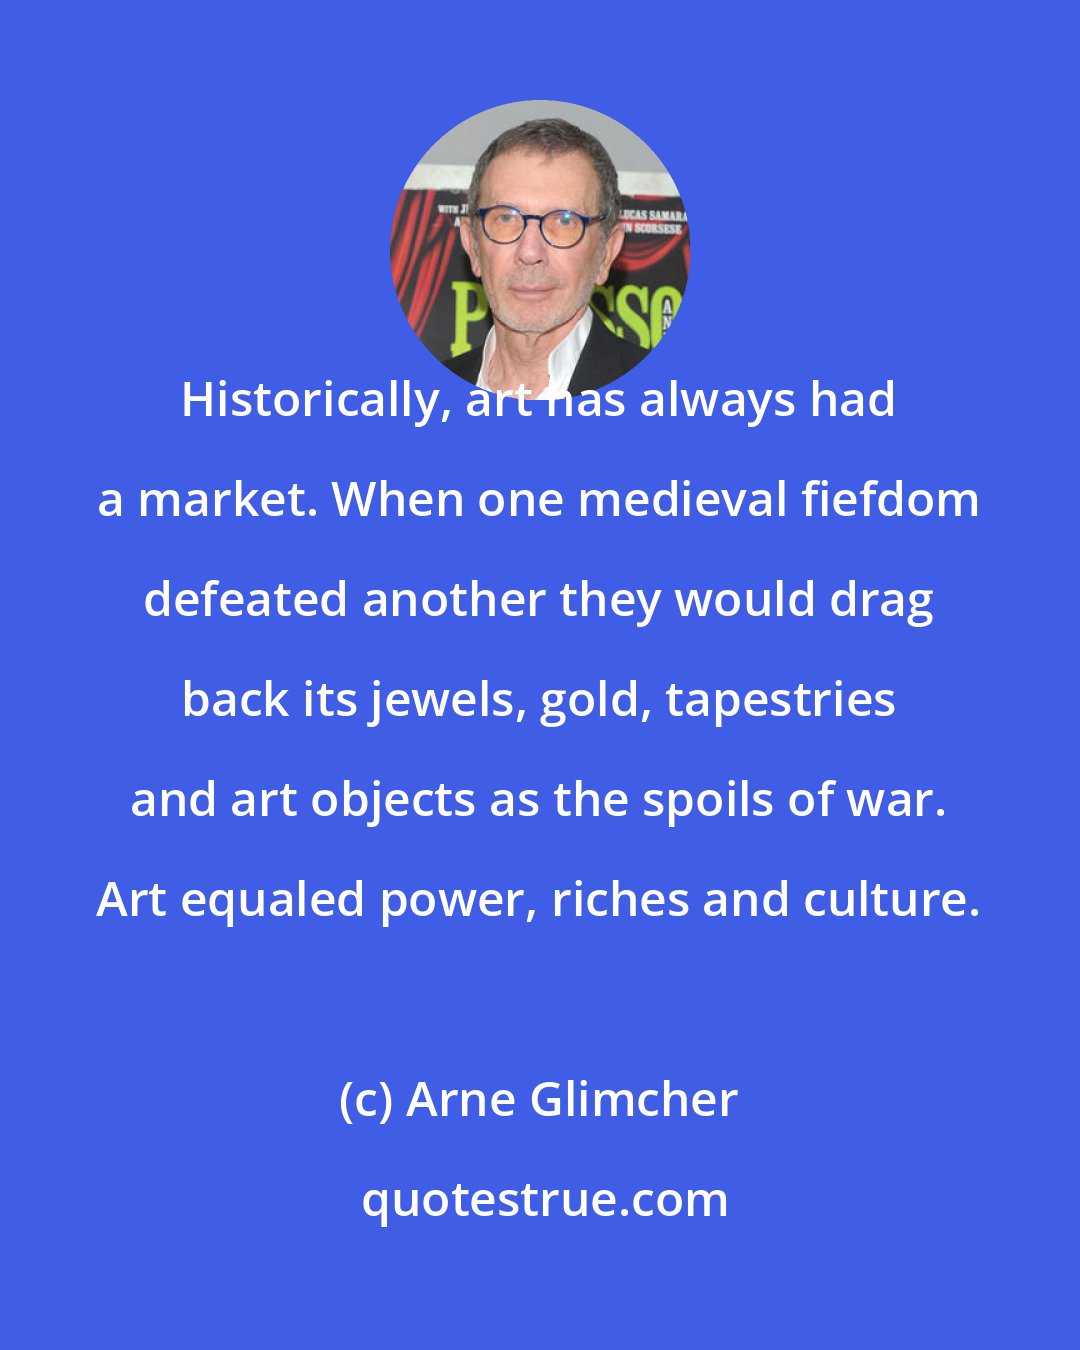 Arne Glimcher: Historically, art has always had a market. When one medieval fiefdom defeated another they would drag back its jewels, gold, tapestries and art objects as the spoils of war. Art equaled power, riches and culture.